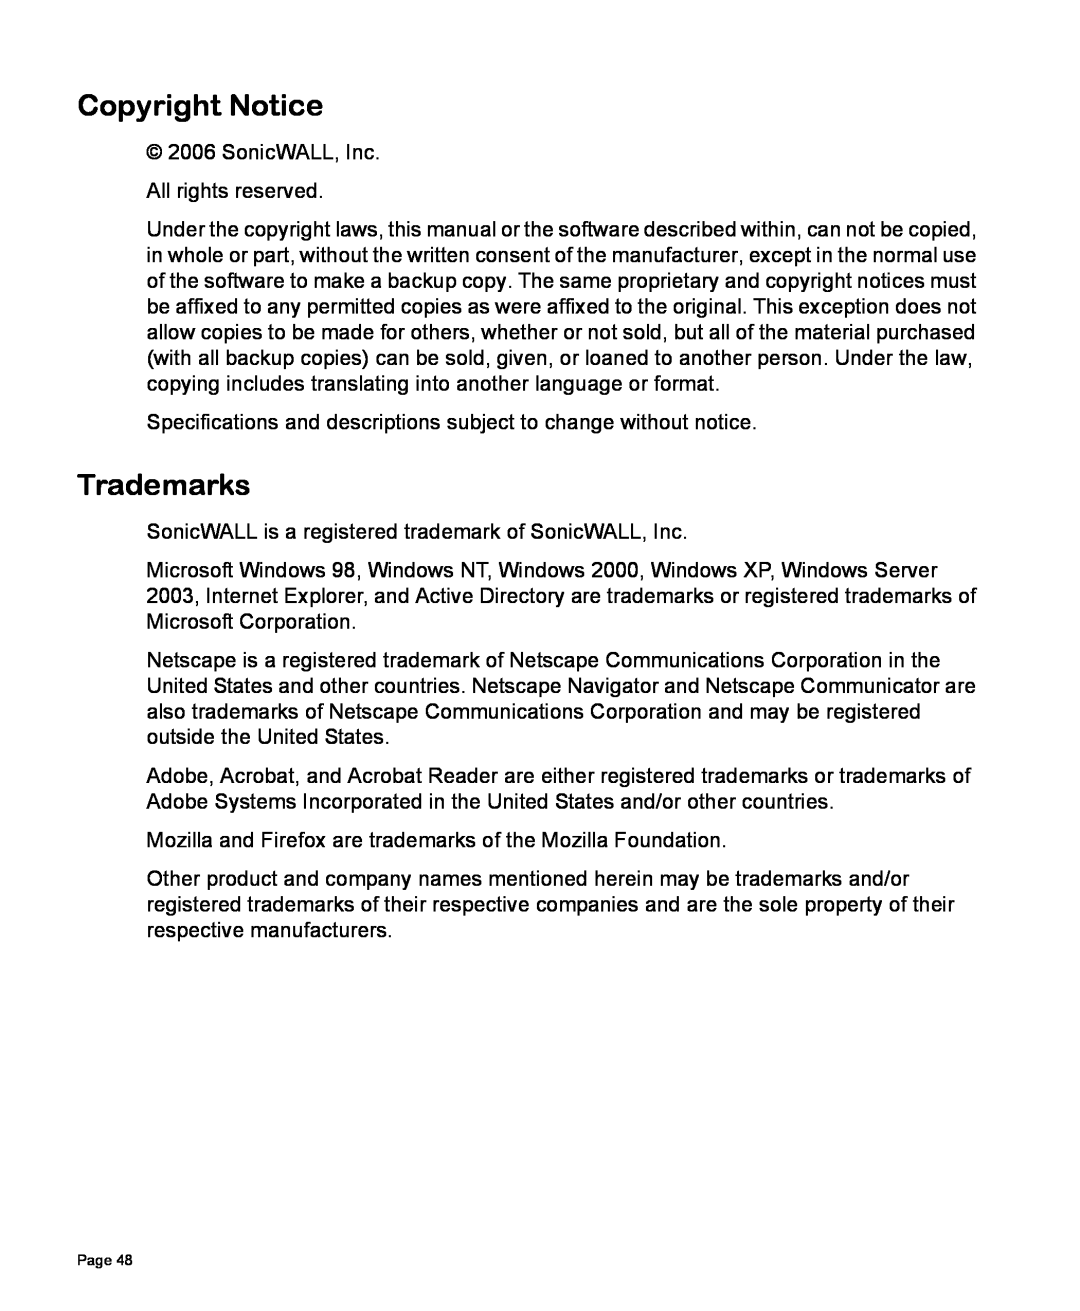 SonicWALL TZ 170 SP manual Copyright Notice, Trademarks 